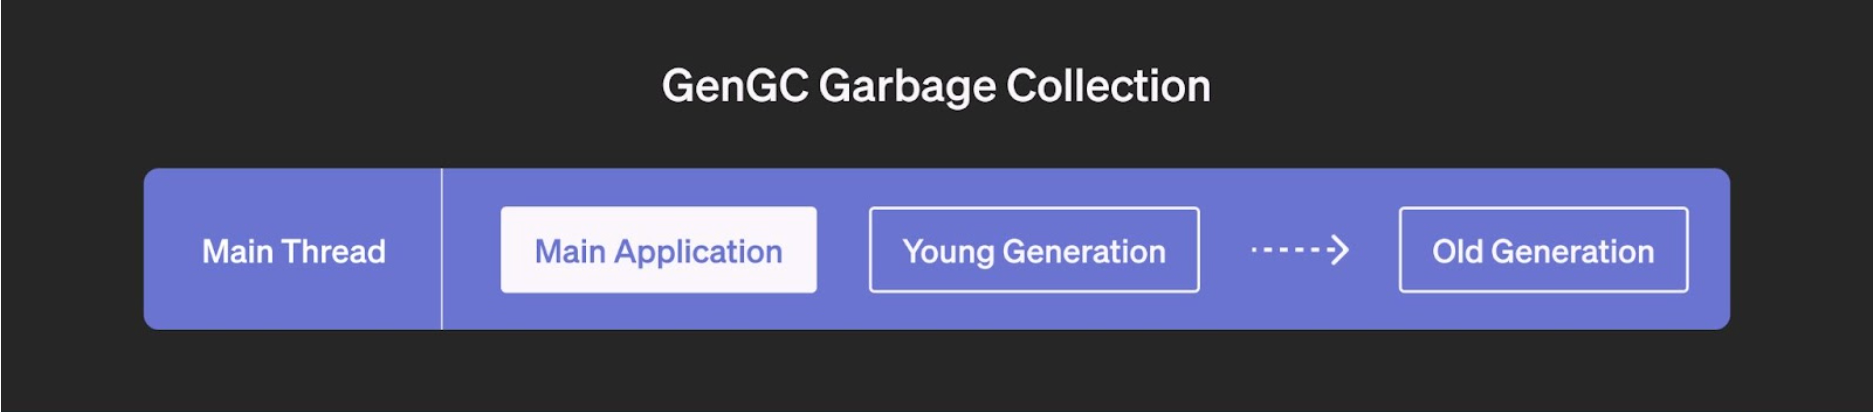 A flow chart titled "GenGC Garbage Collection"